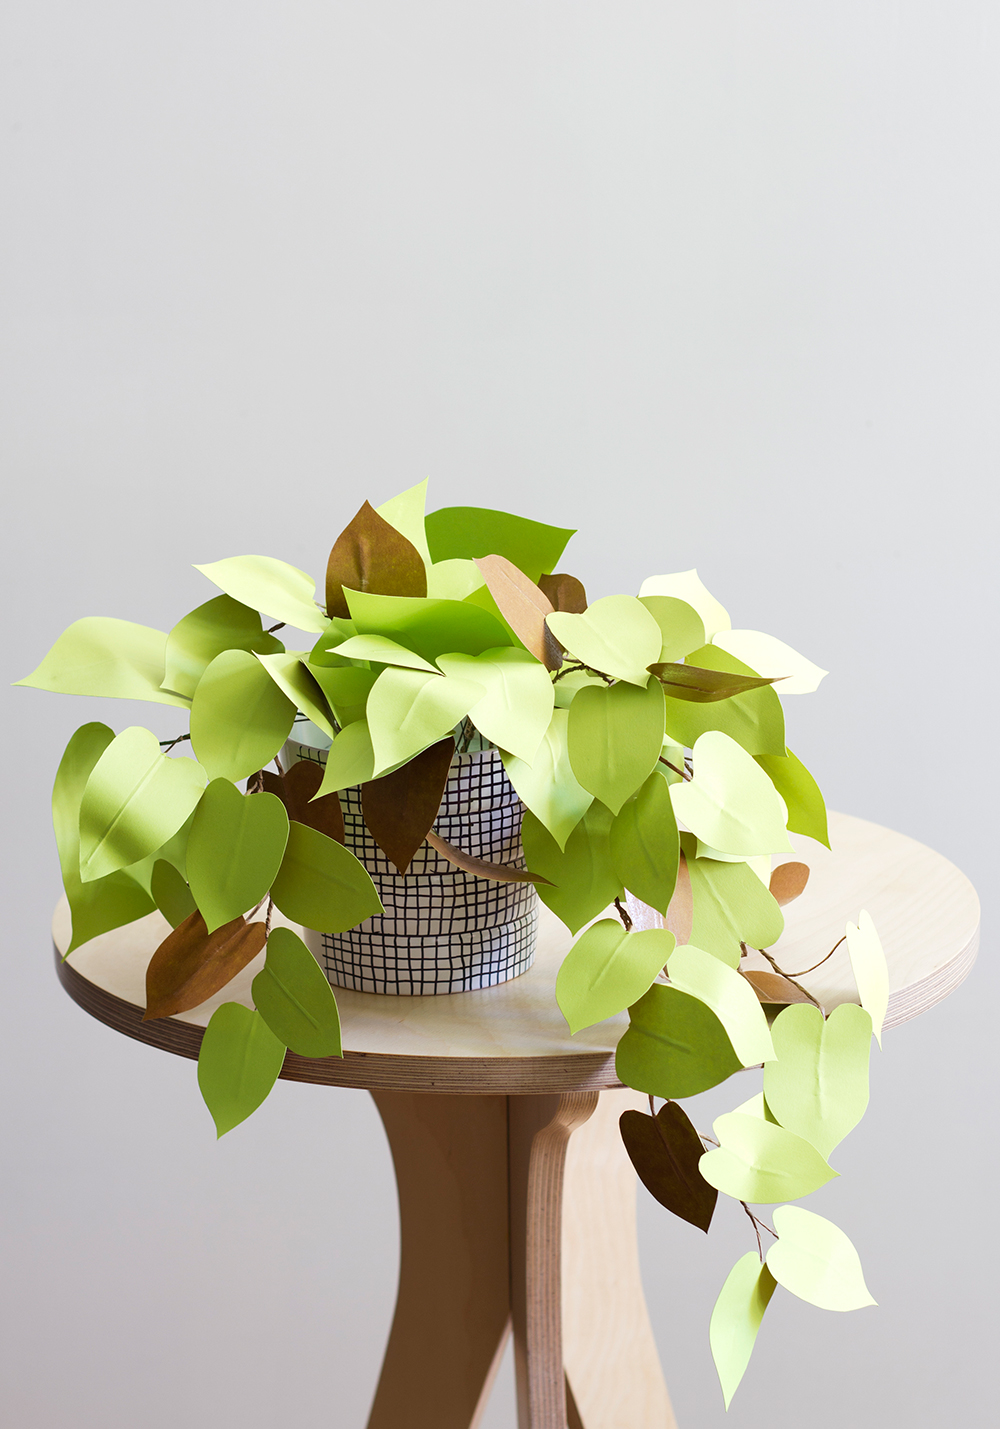 An artificial heart leaf philodendron made of colored paper is placed under the wooden round table